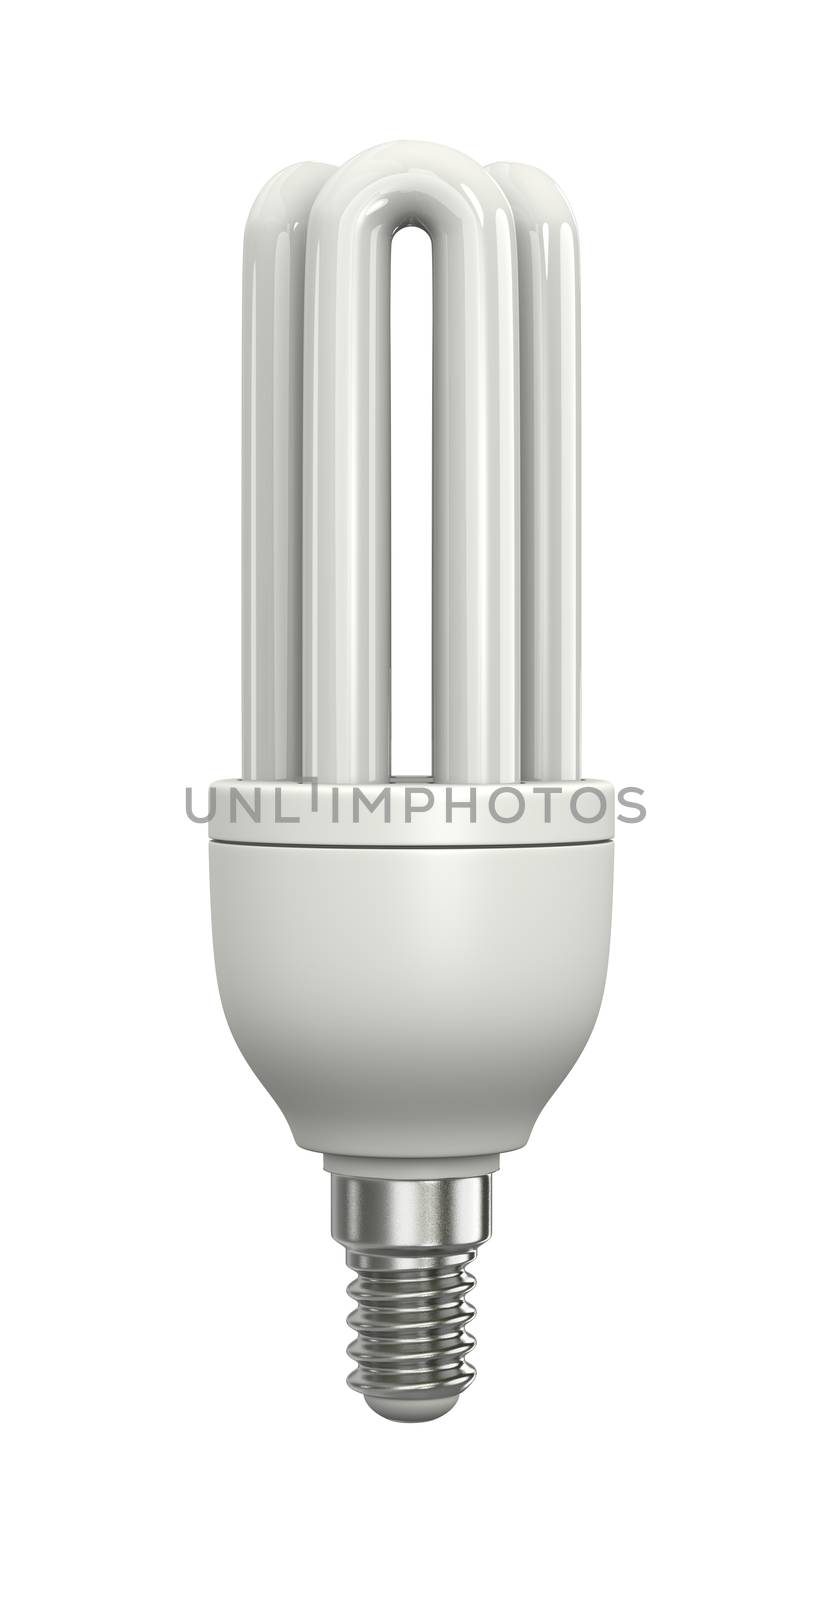 One Single Compact Fluorescent Lamp Isolated on White Background 3D Illustration